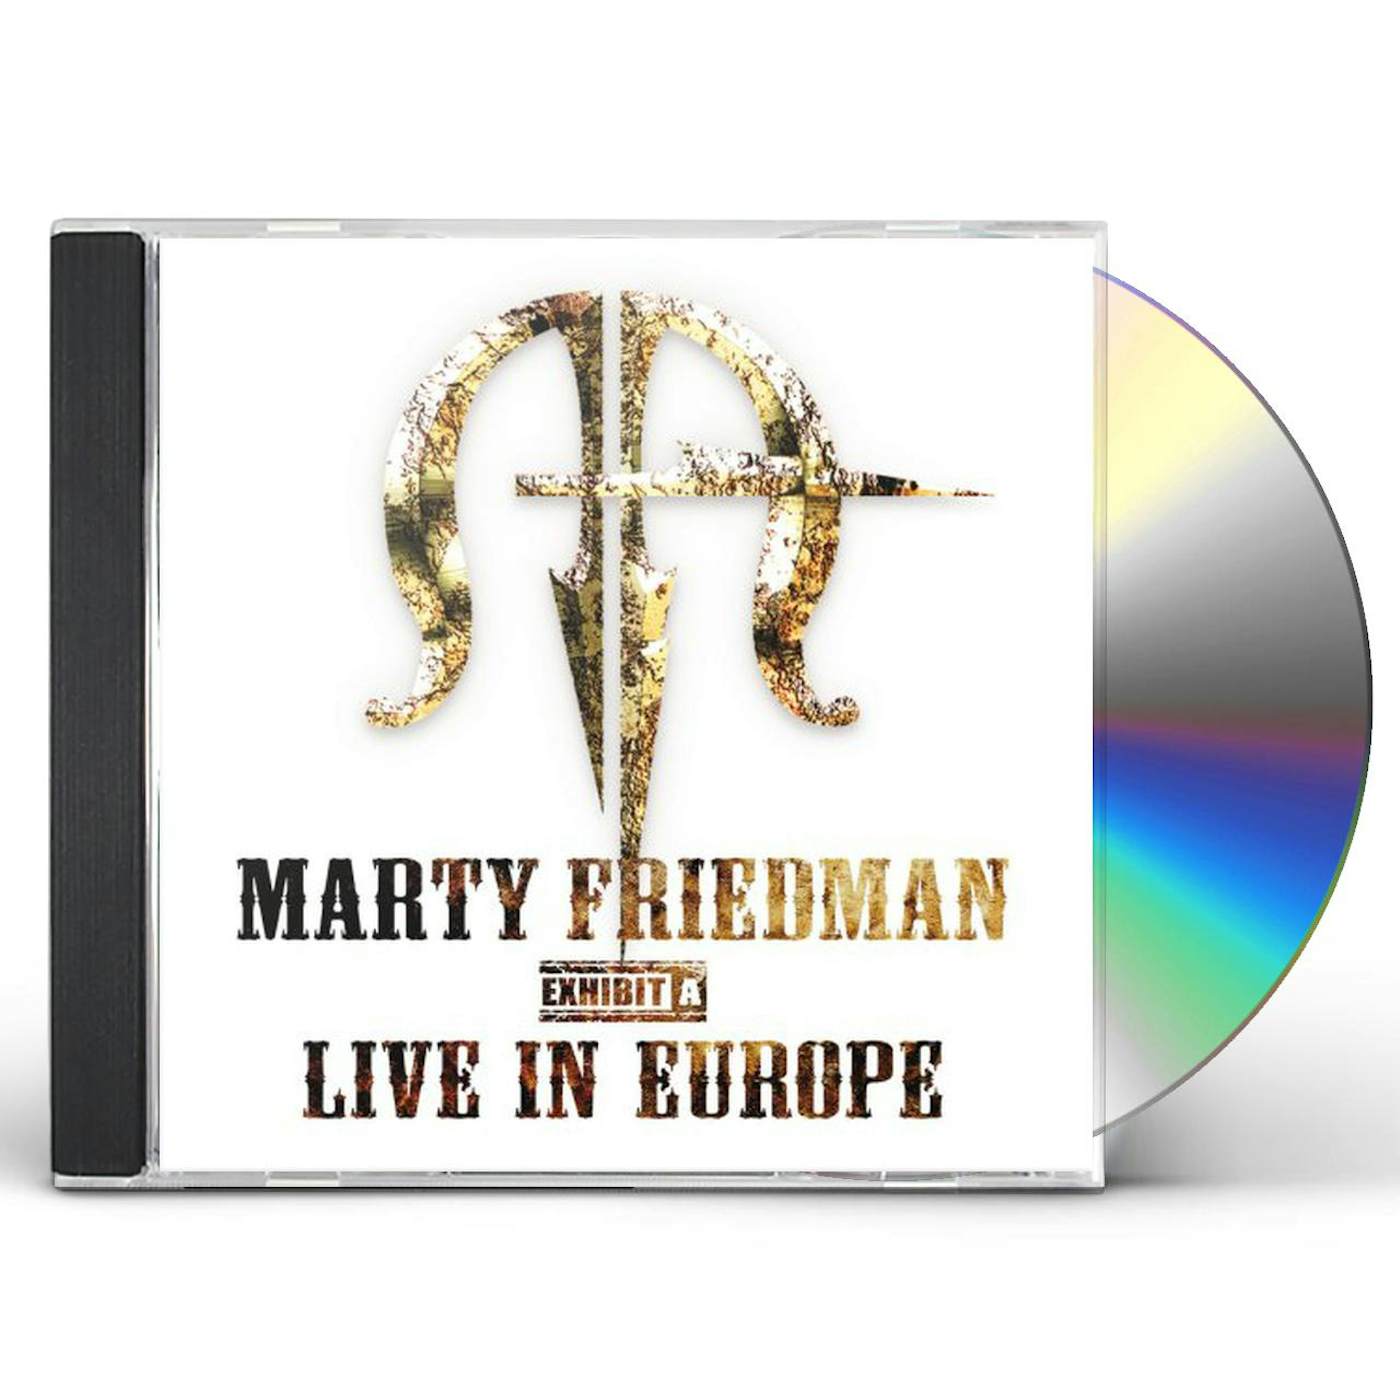 Marty Friedman LIVE IN EUROPE CD